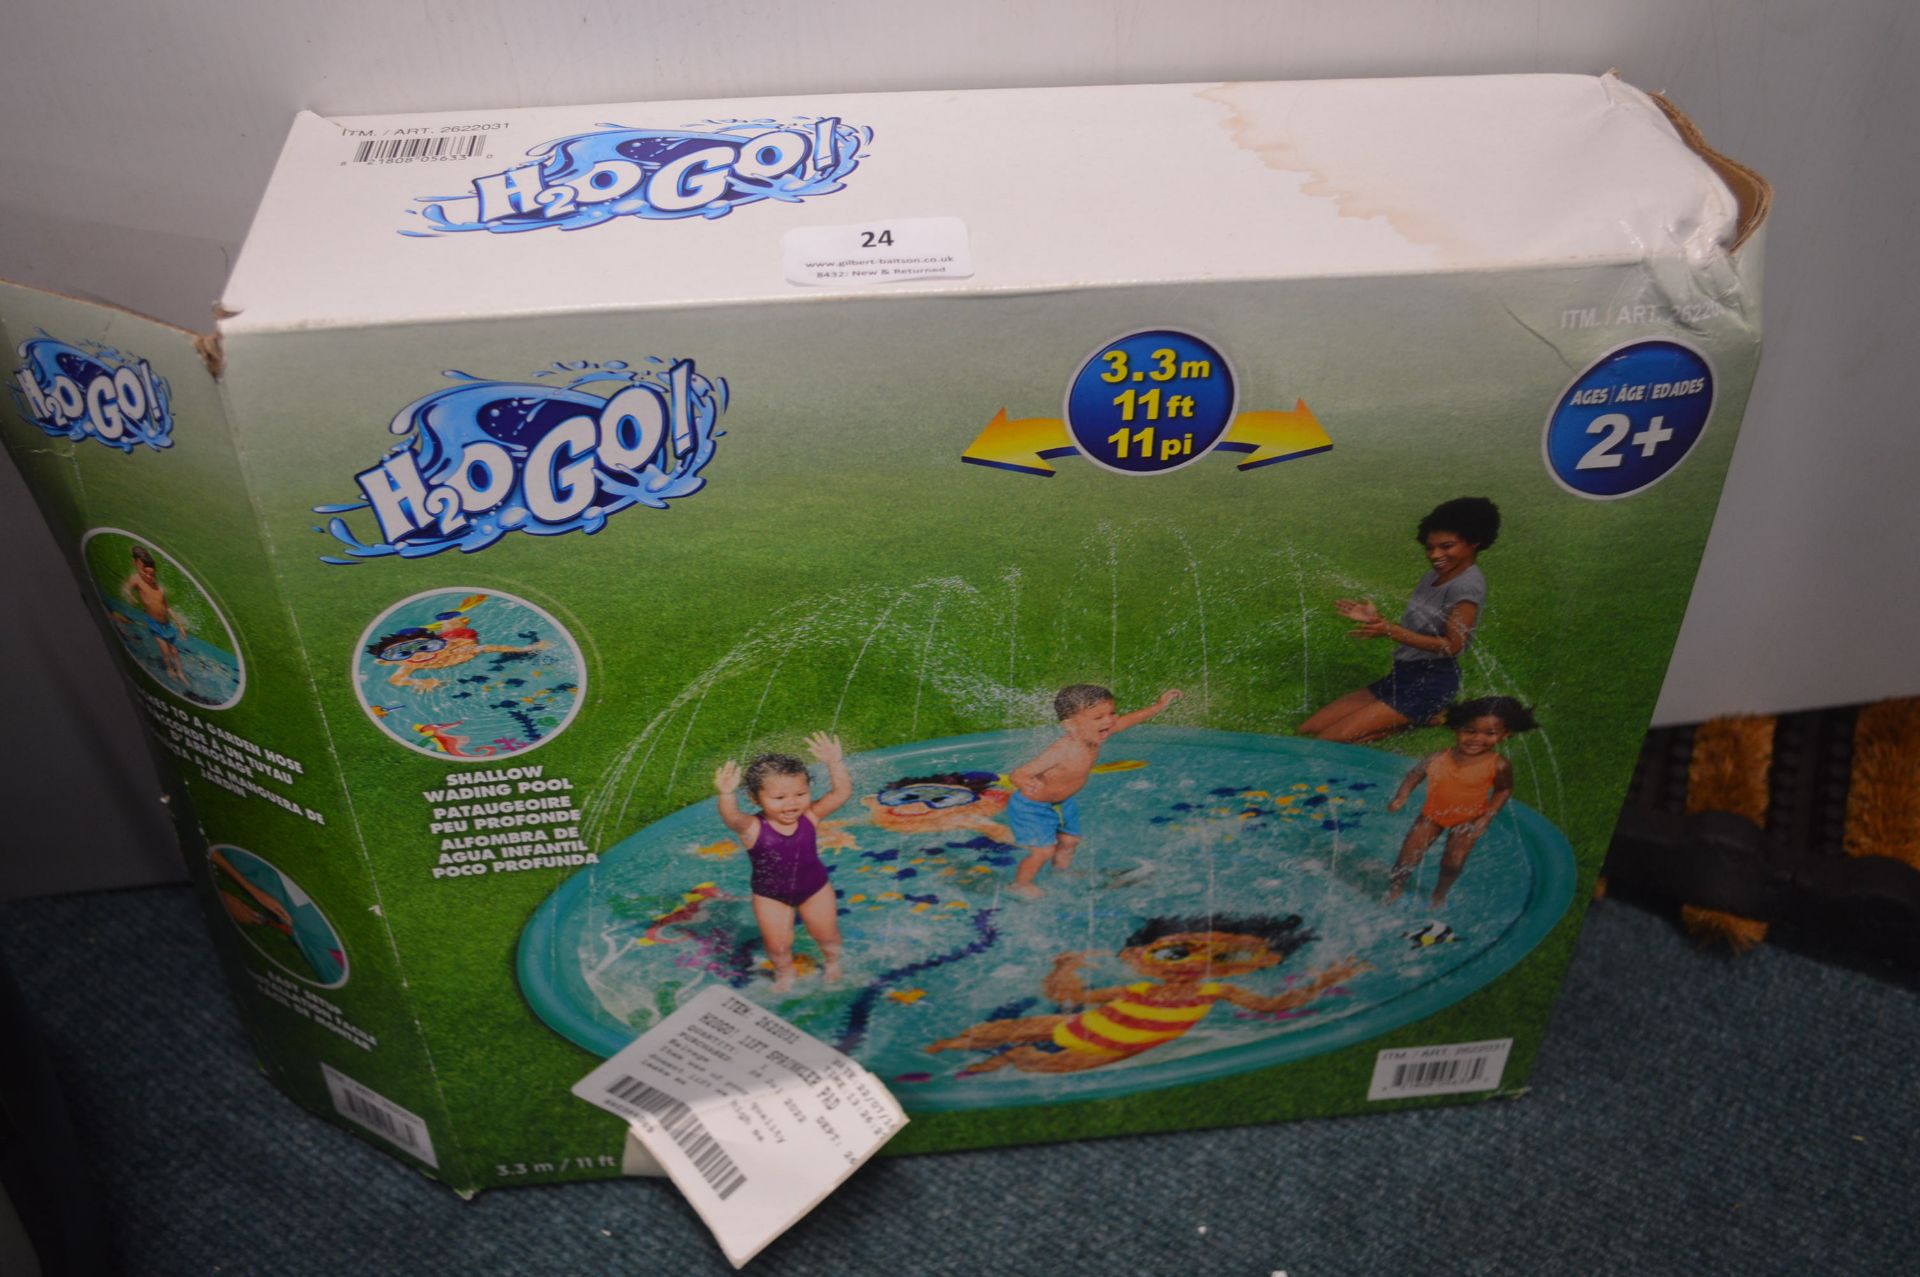 *H2Go 3.3m Shallow Wading Pool